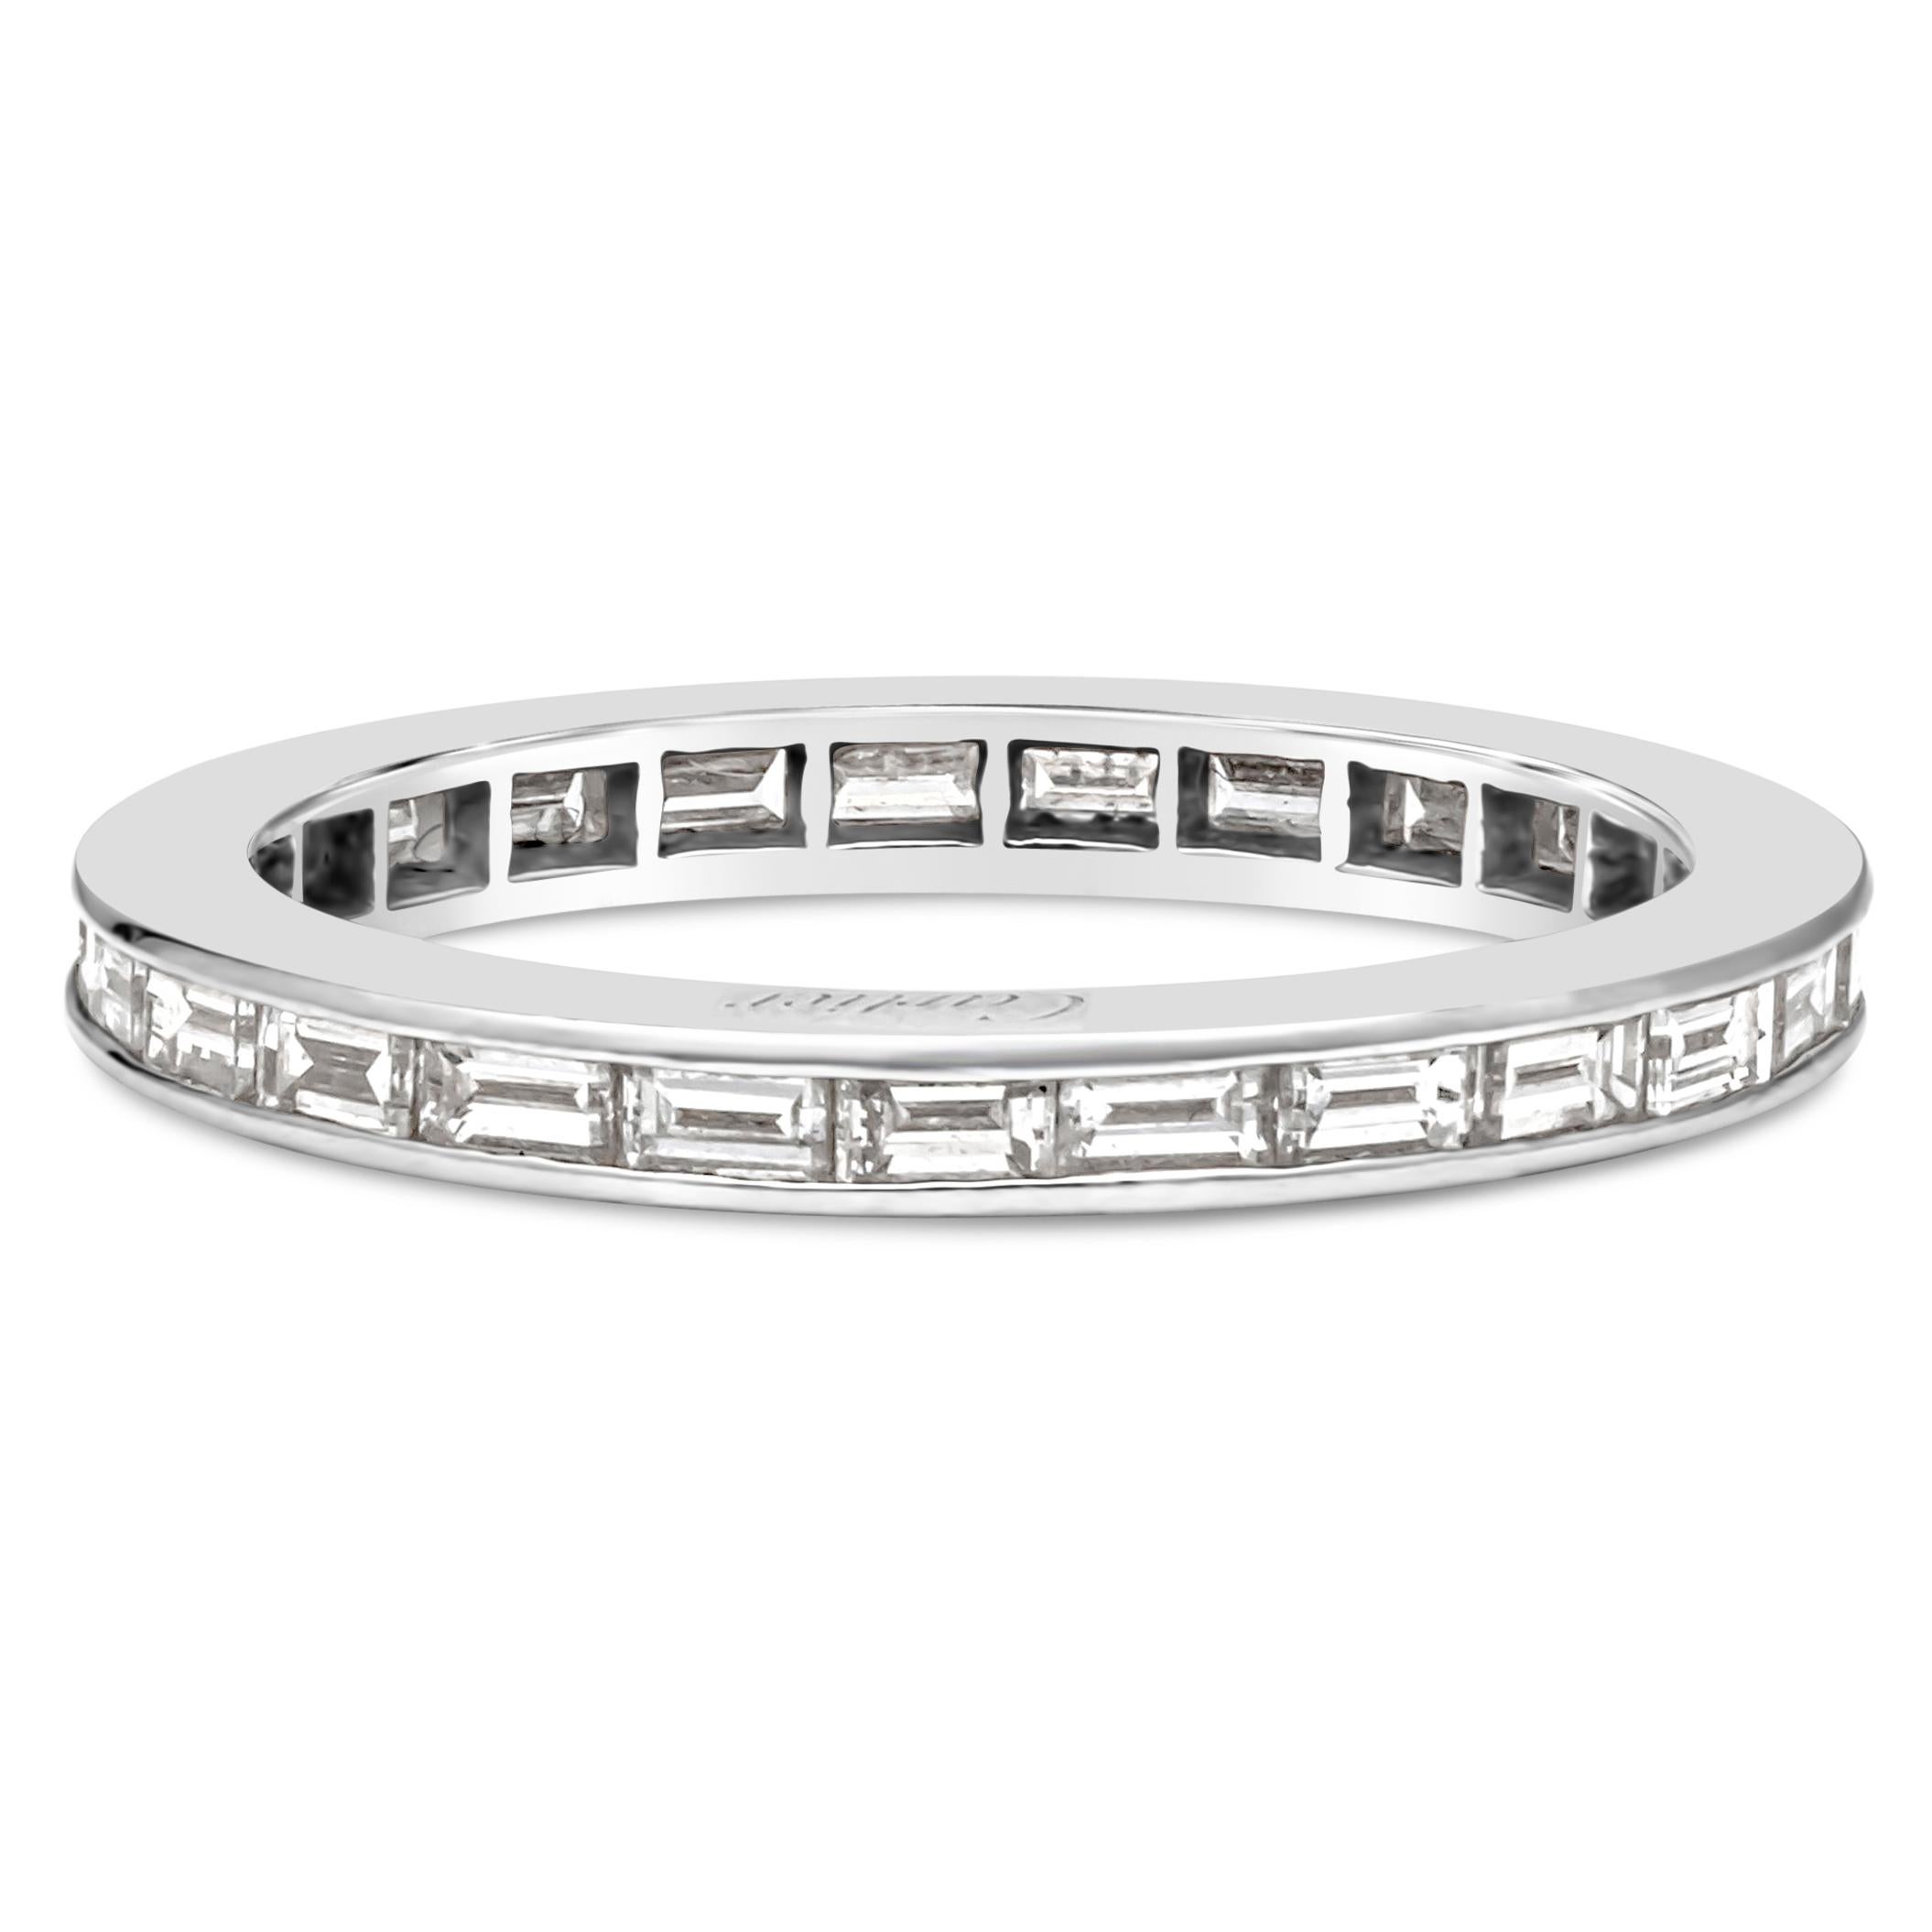 A beautiful eternity wedding band part of the collection by Cartier showcasing a row of 25 baguette cut diamonds weighing 1.02 carats total, set in a beautiful channel set and made in platinum. Diamonds are approximately D-E color, VVS+ in clarity.